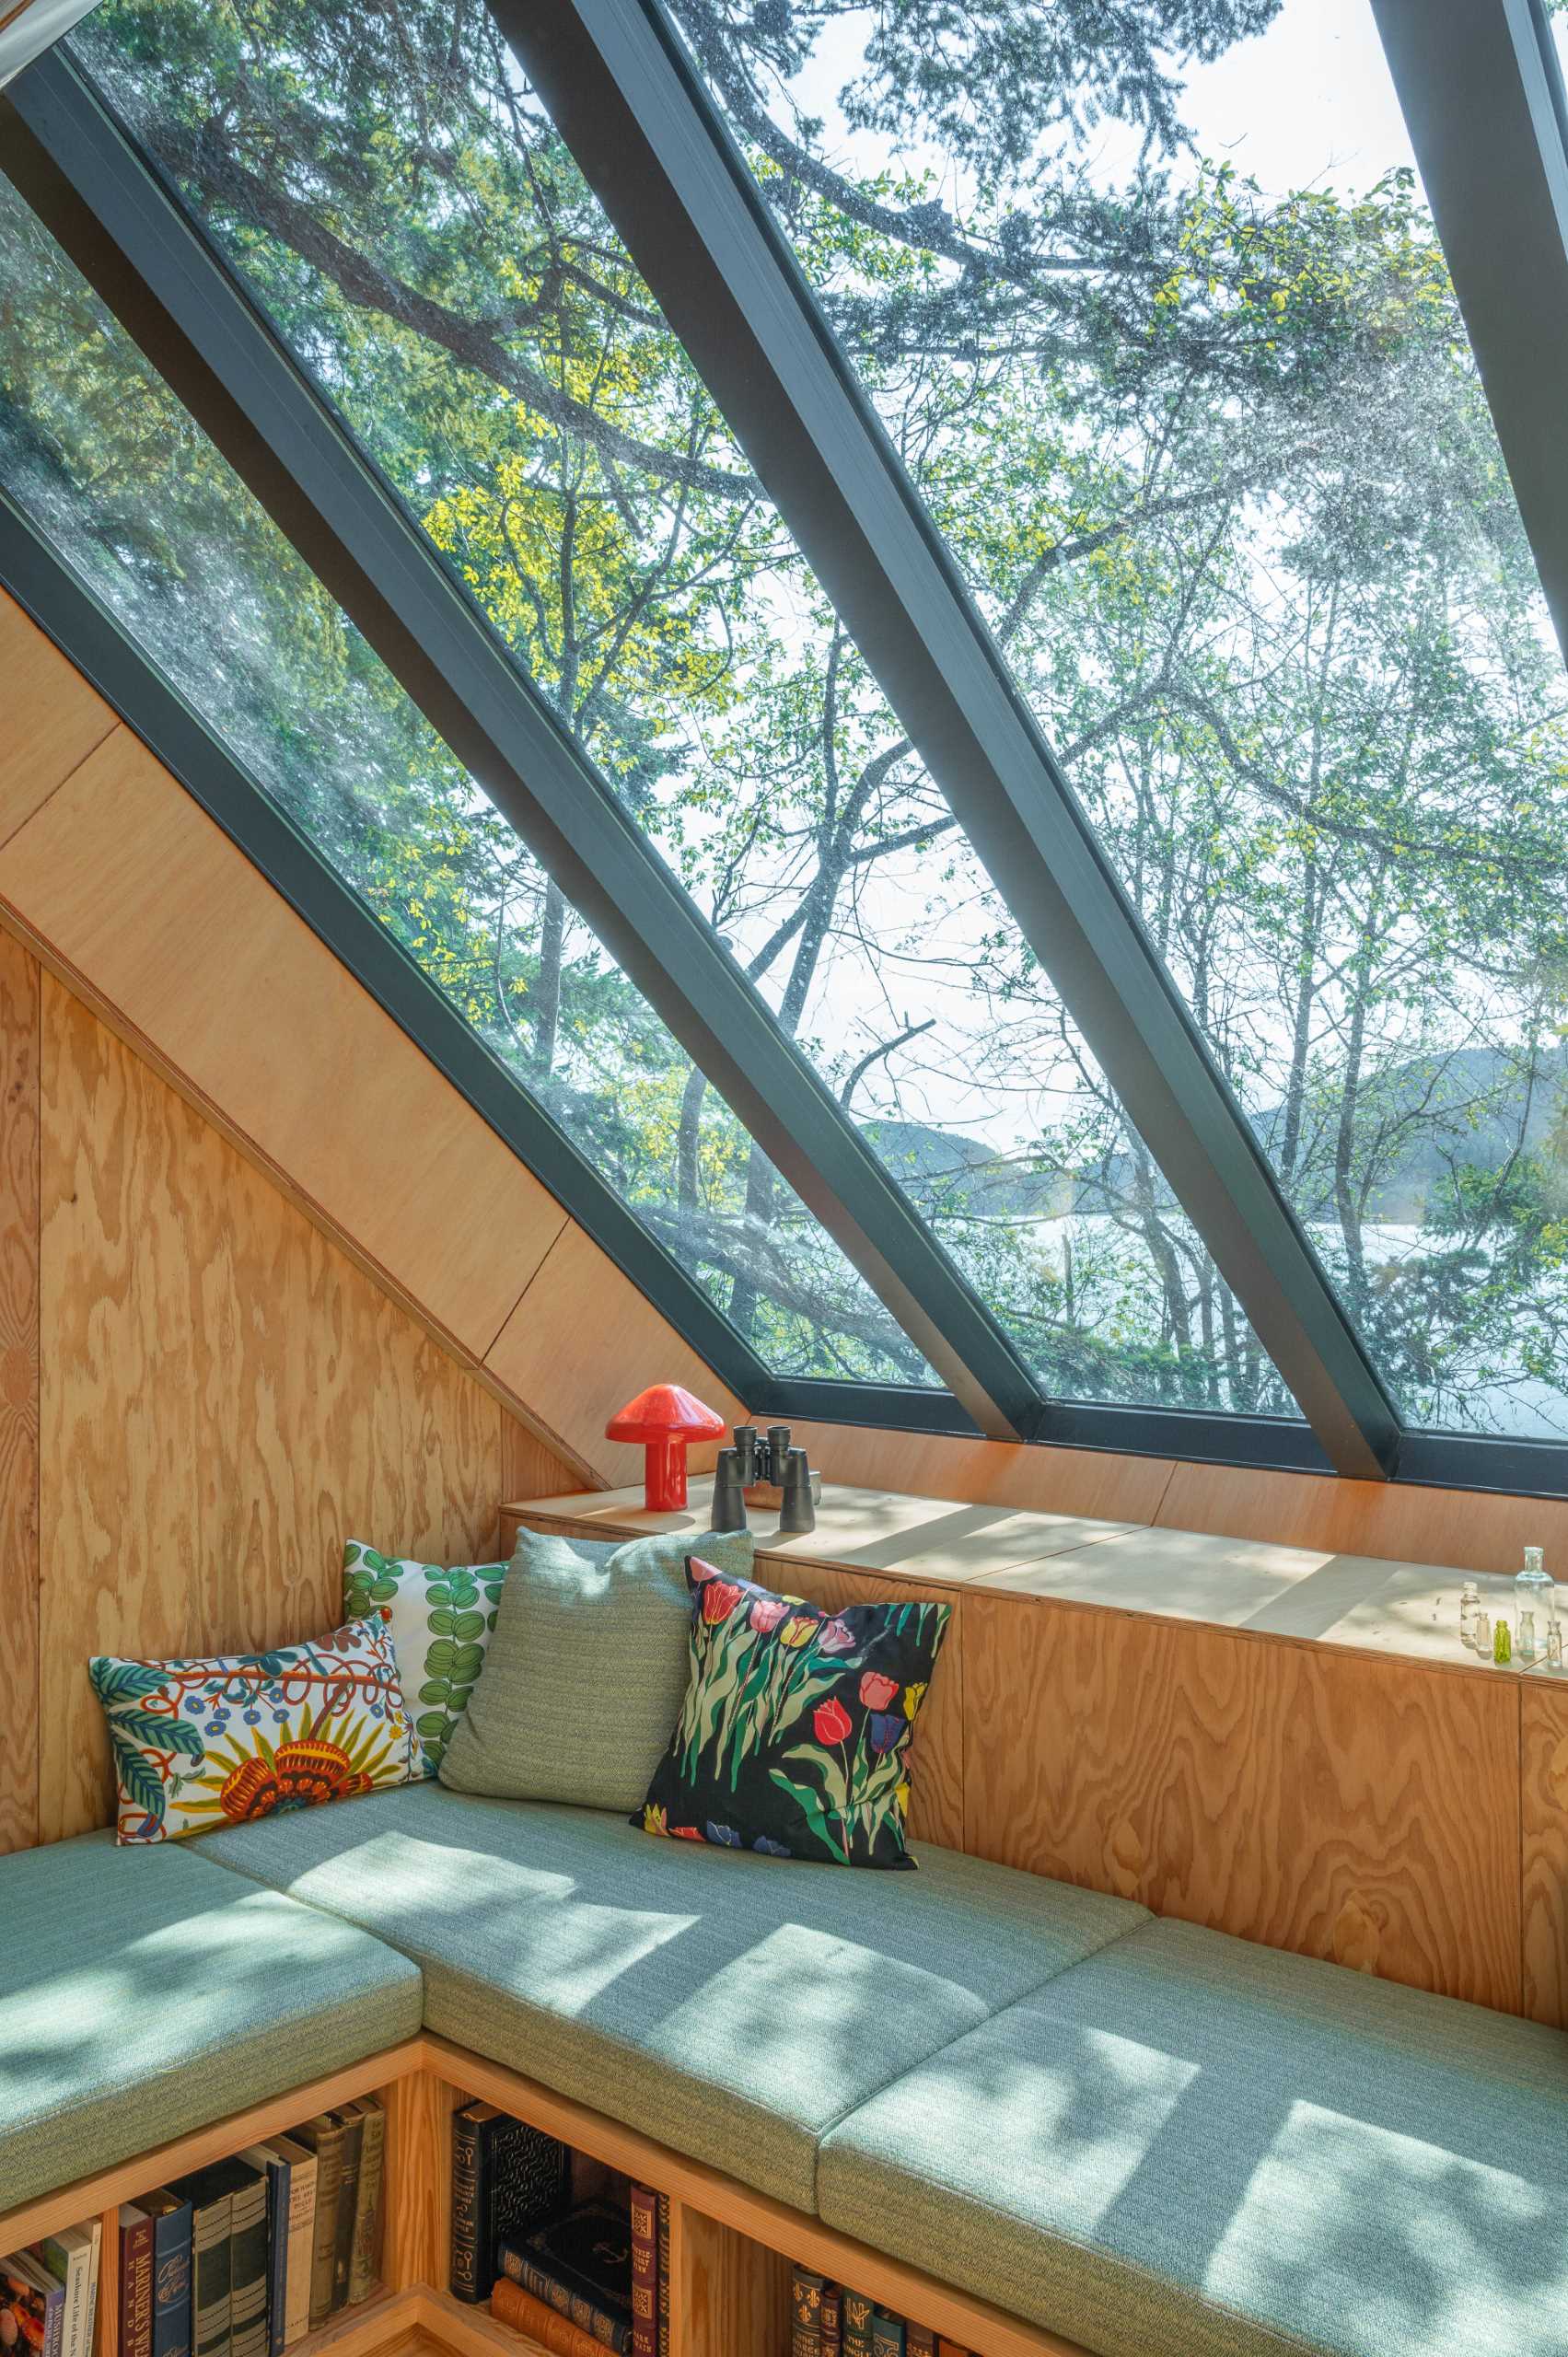 At the top of the stairs in this cabin, there's an open lounge area beneath custom skylights. Custom furniture with open storage underneath is topped with upholstered cushions, creating a cozy lounge.